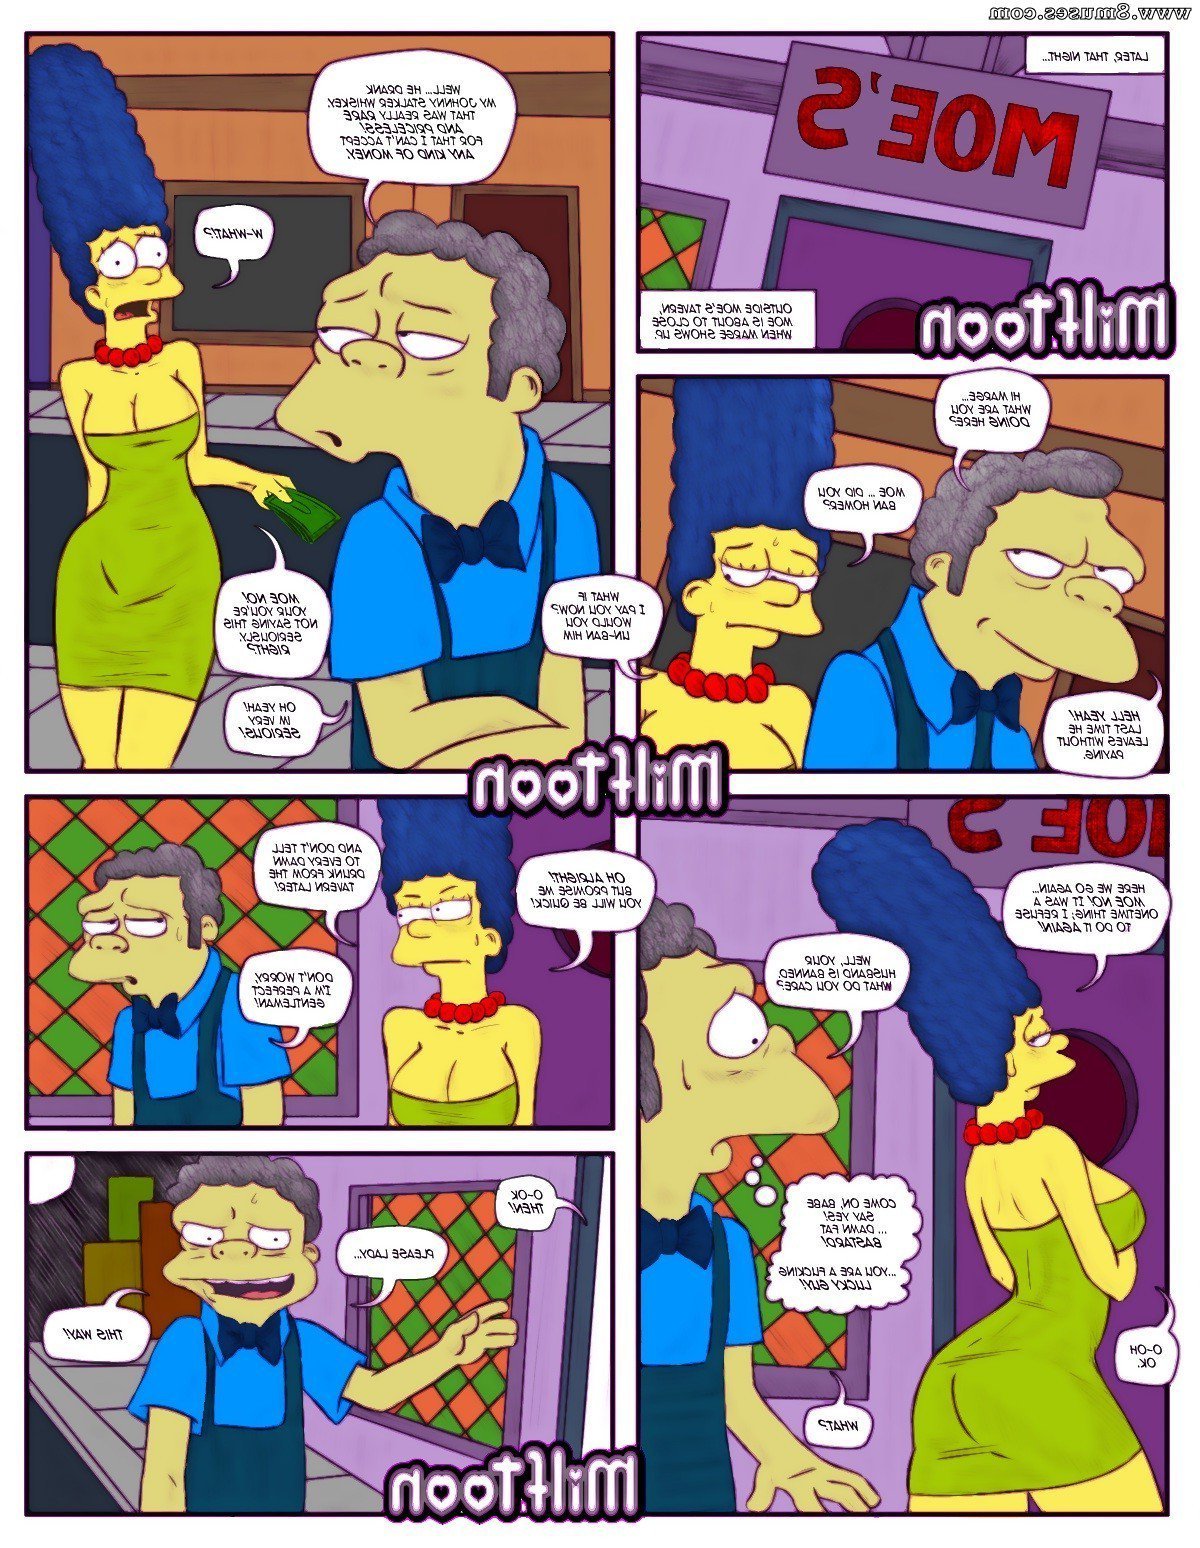 MilfToon-Comics/The-Simpsons/Issue-1 The_Simpsons_-_Issue_1_3.jpg